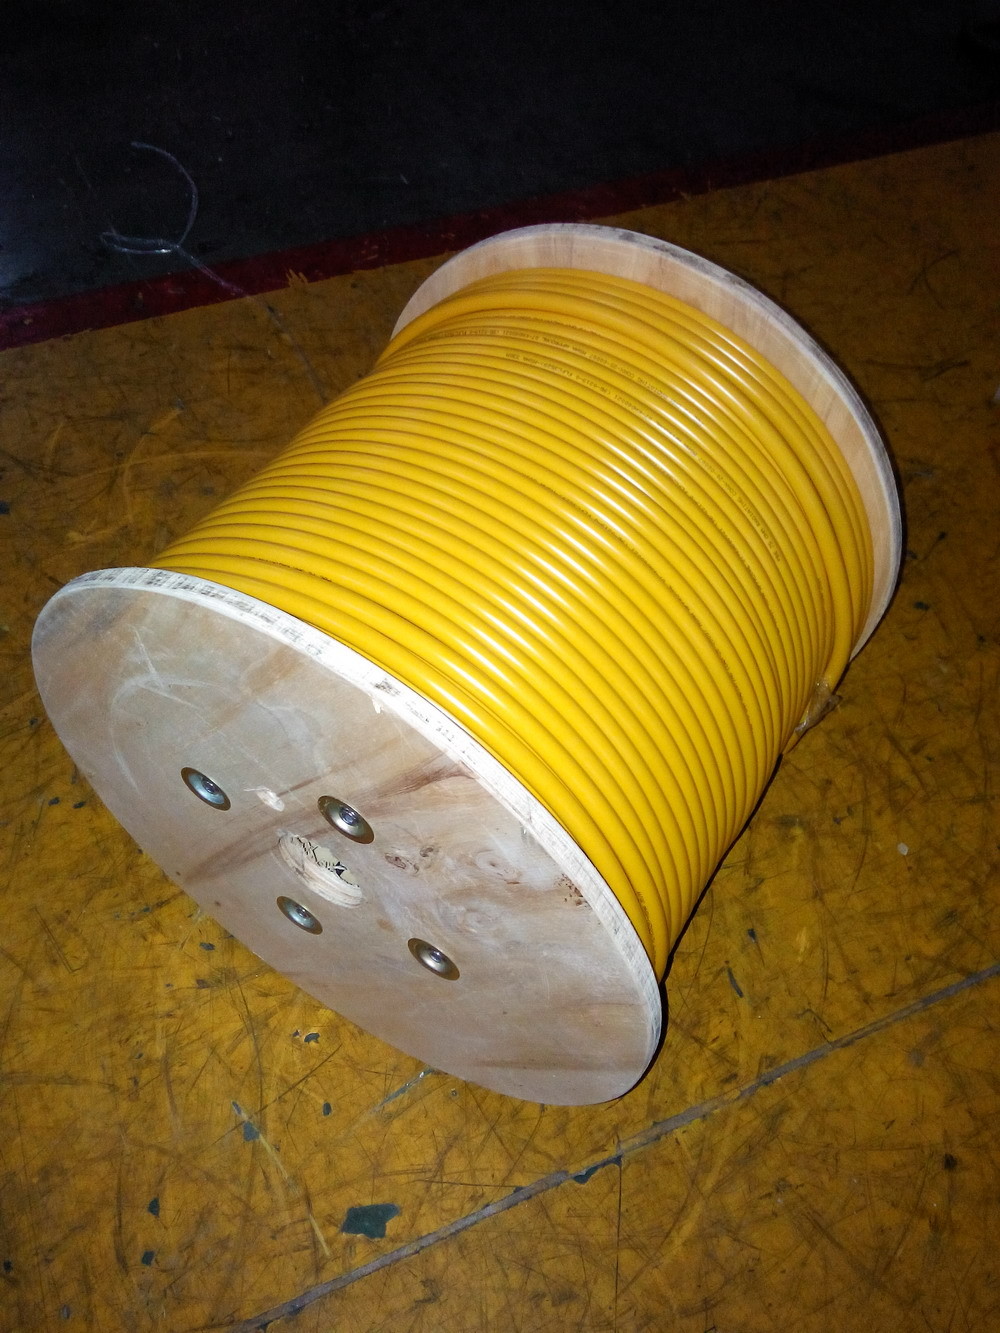  75 Ohm VHF Leaky Feeder Coaxial Cable In Mine , Fire Retardant Jacket Manufactures